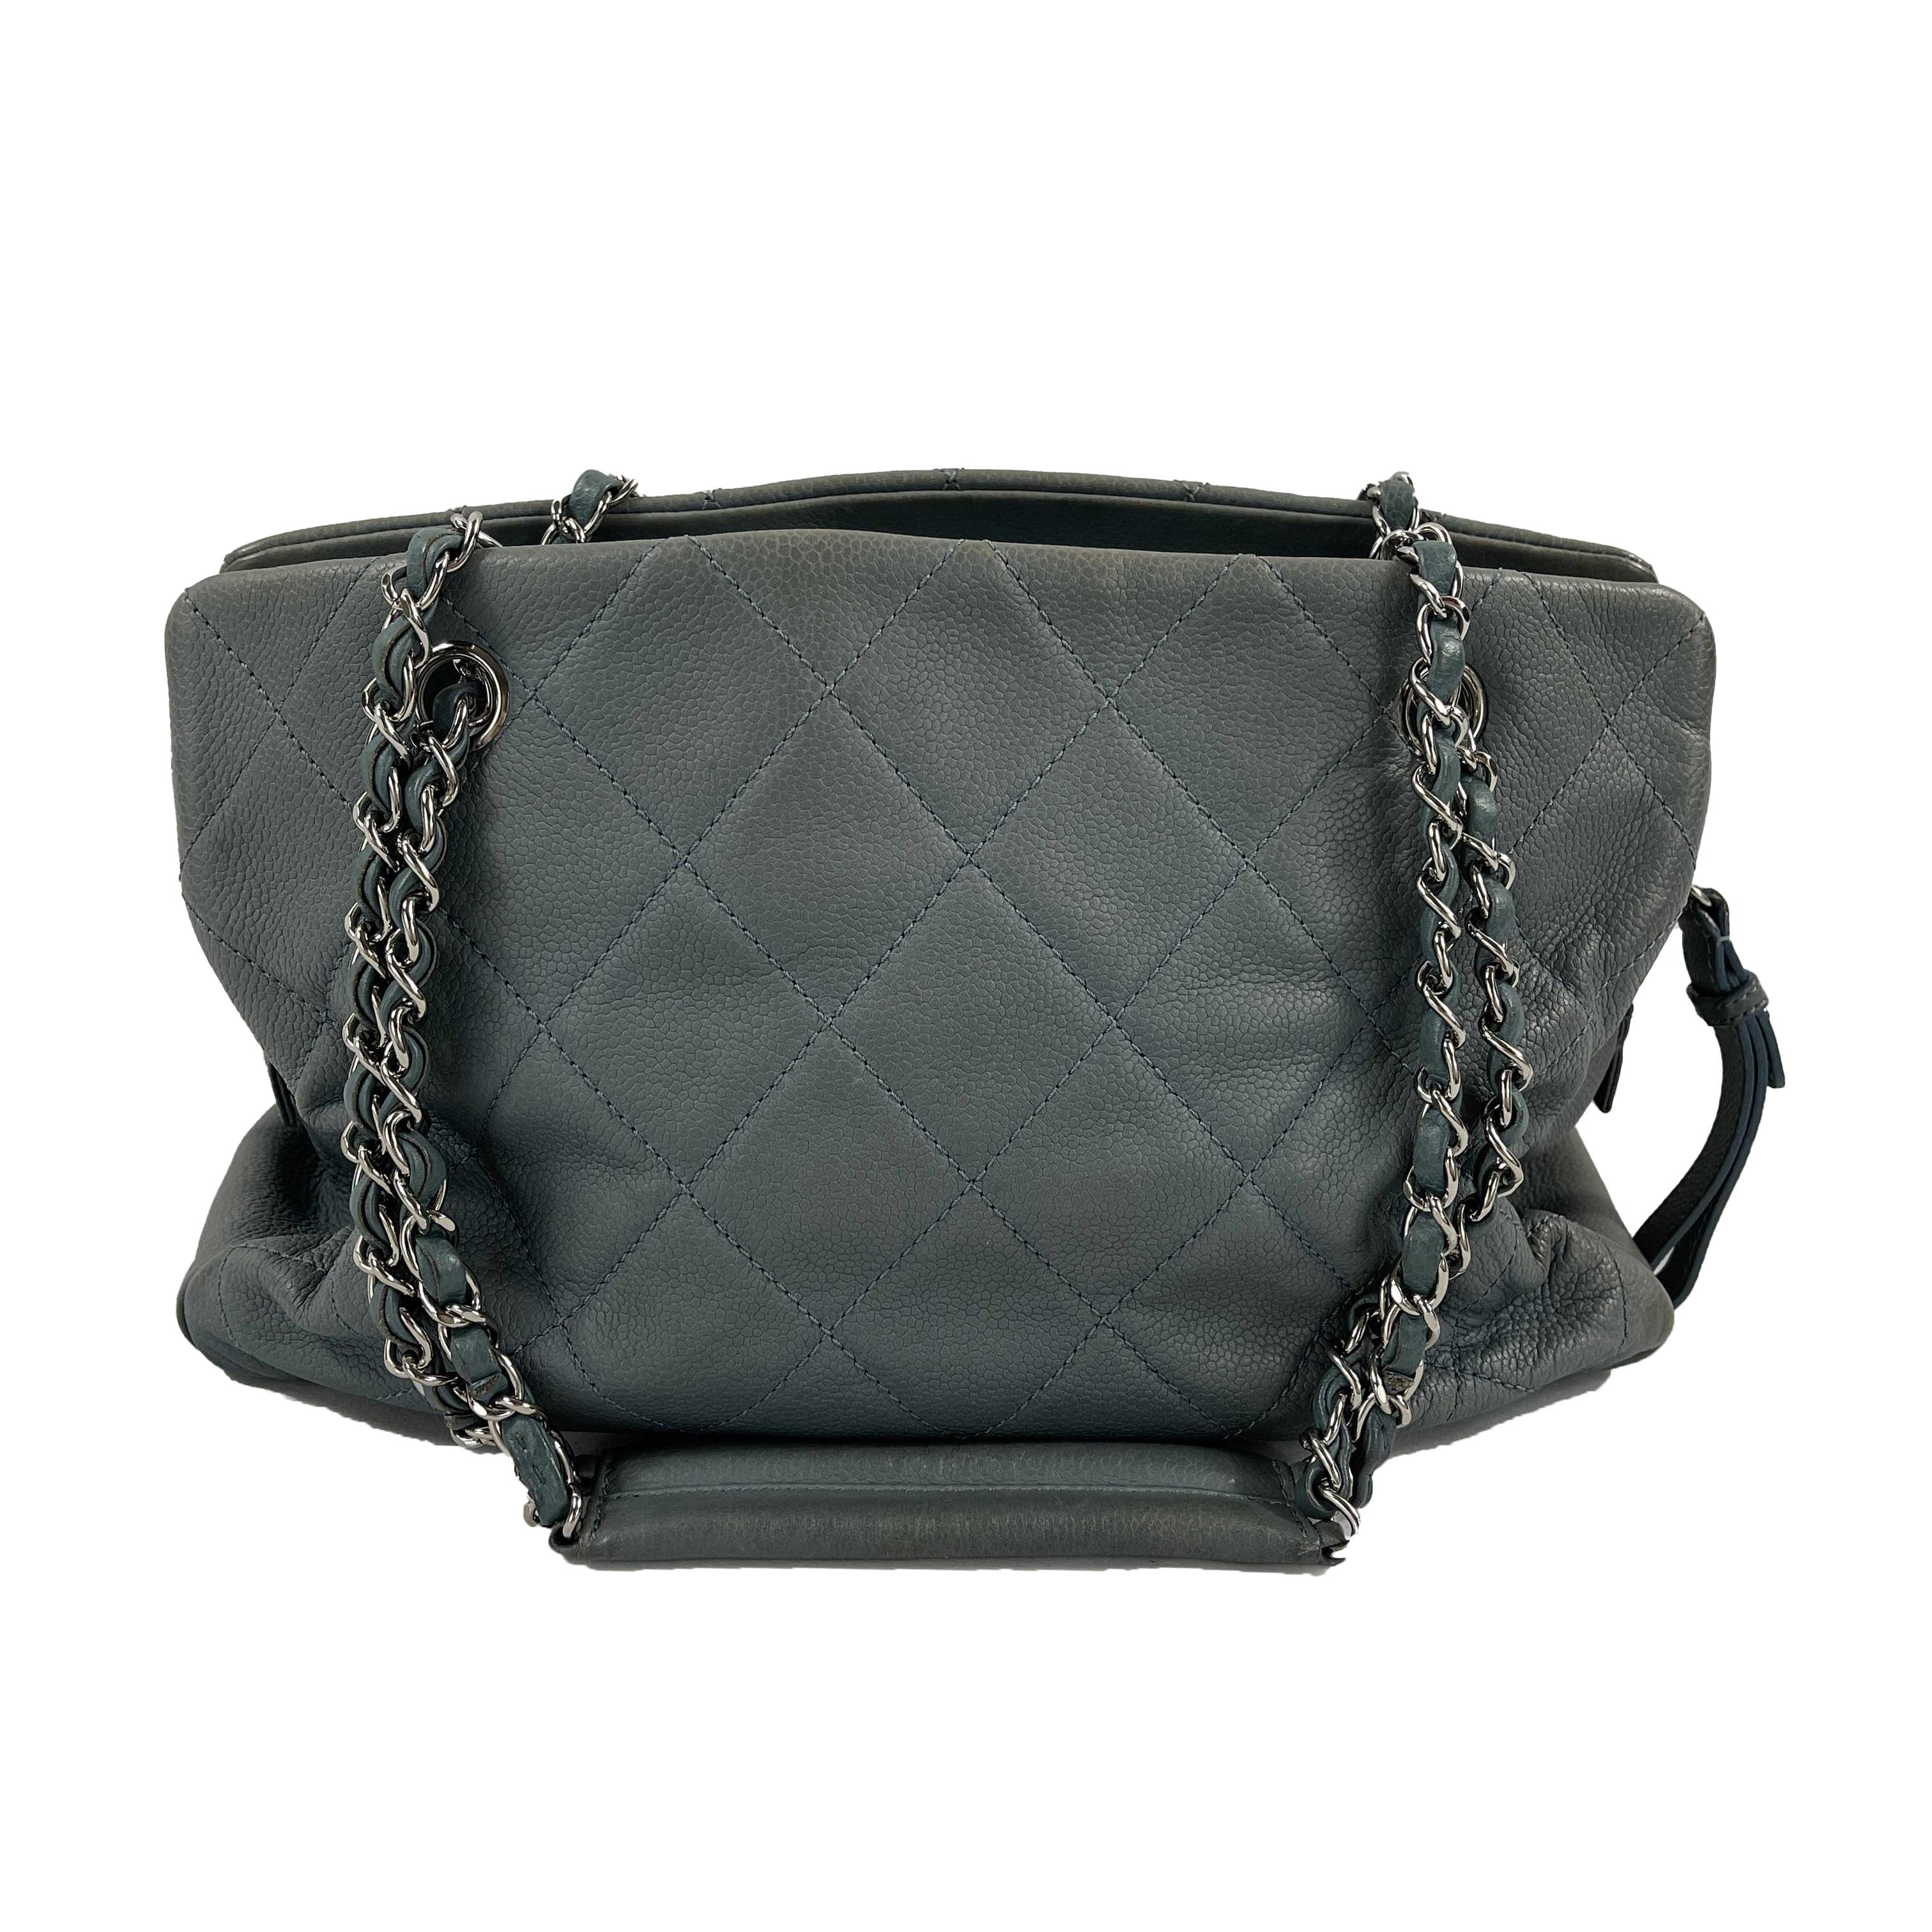 CHANEL -  Seafoam / Silver CC Caviar Medium Leather Shopping Tote / Shoulder Bag

Description

From the 2010 to 2011 collection.
This timeless Chanel shopping tote is crafted with a seafoam caviar quilted leather and silver-toned hardware.
The